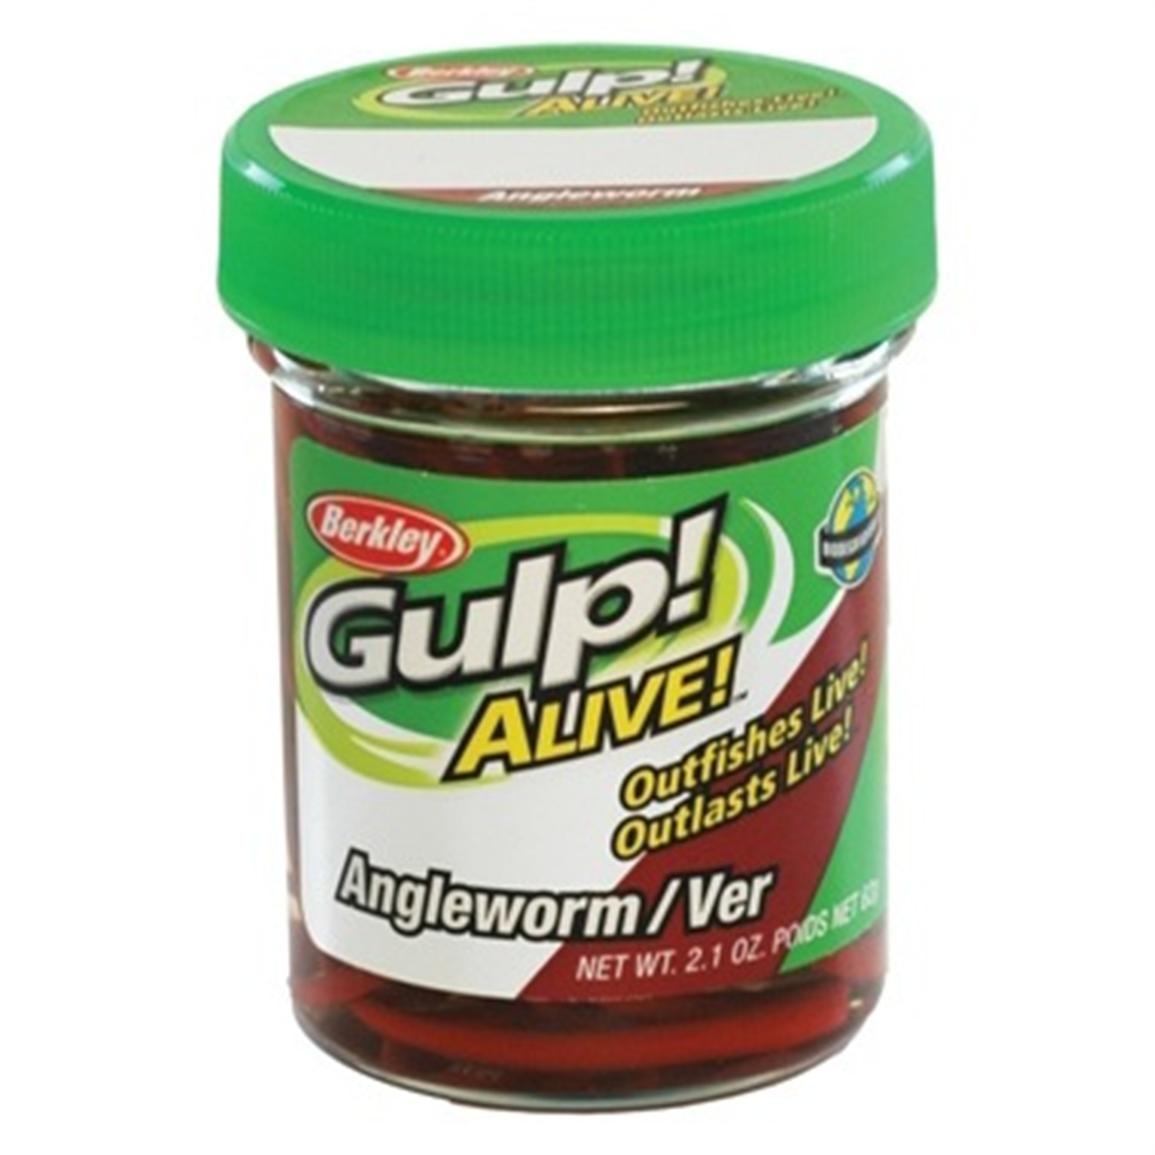 berkley-gulp-alive-angleworms-208091-soft-baits-at-sportsman-s-guide